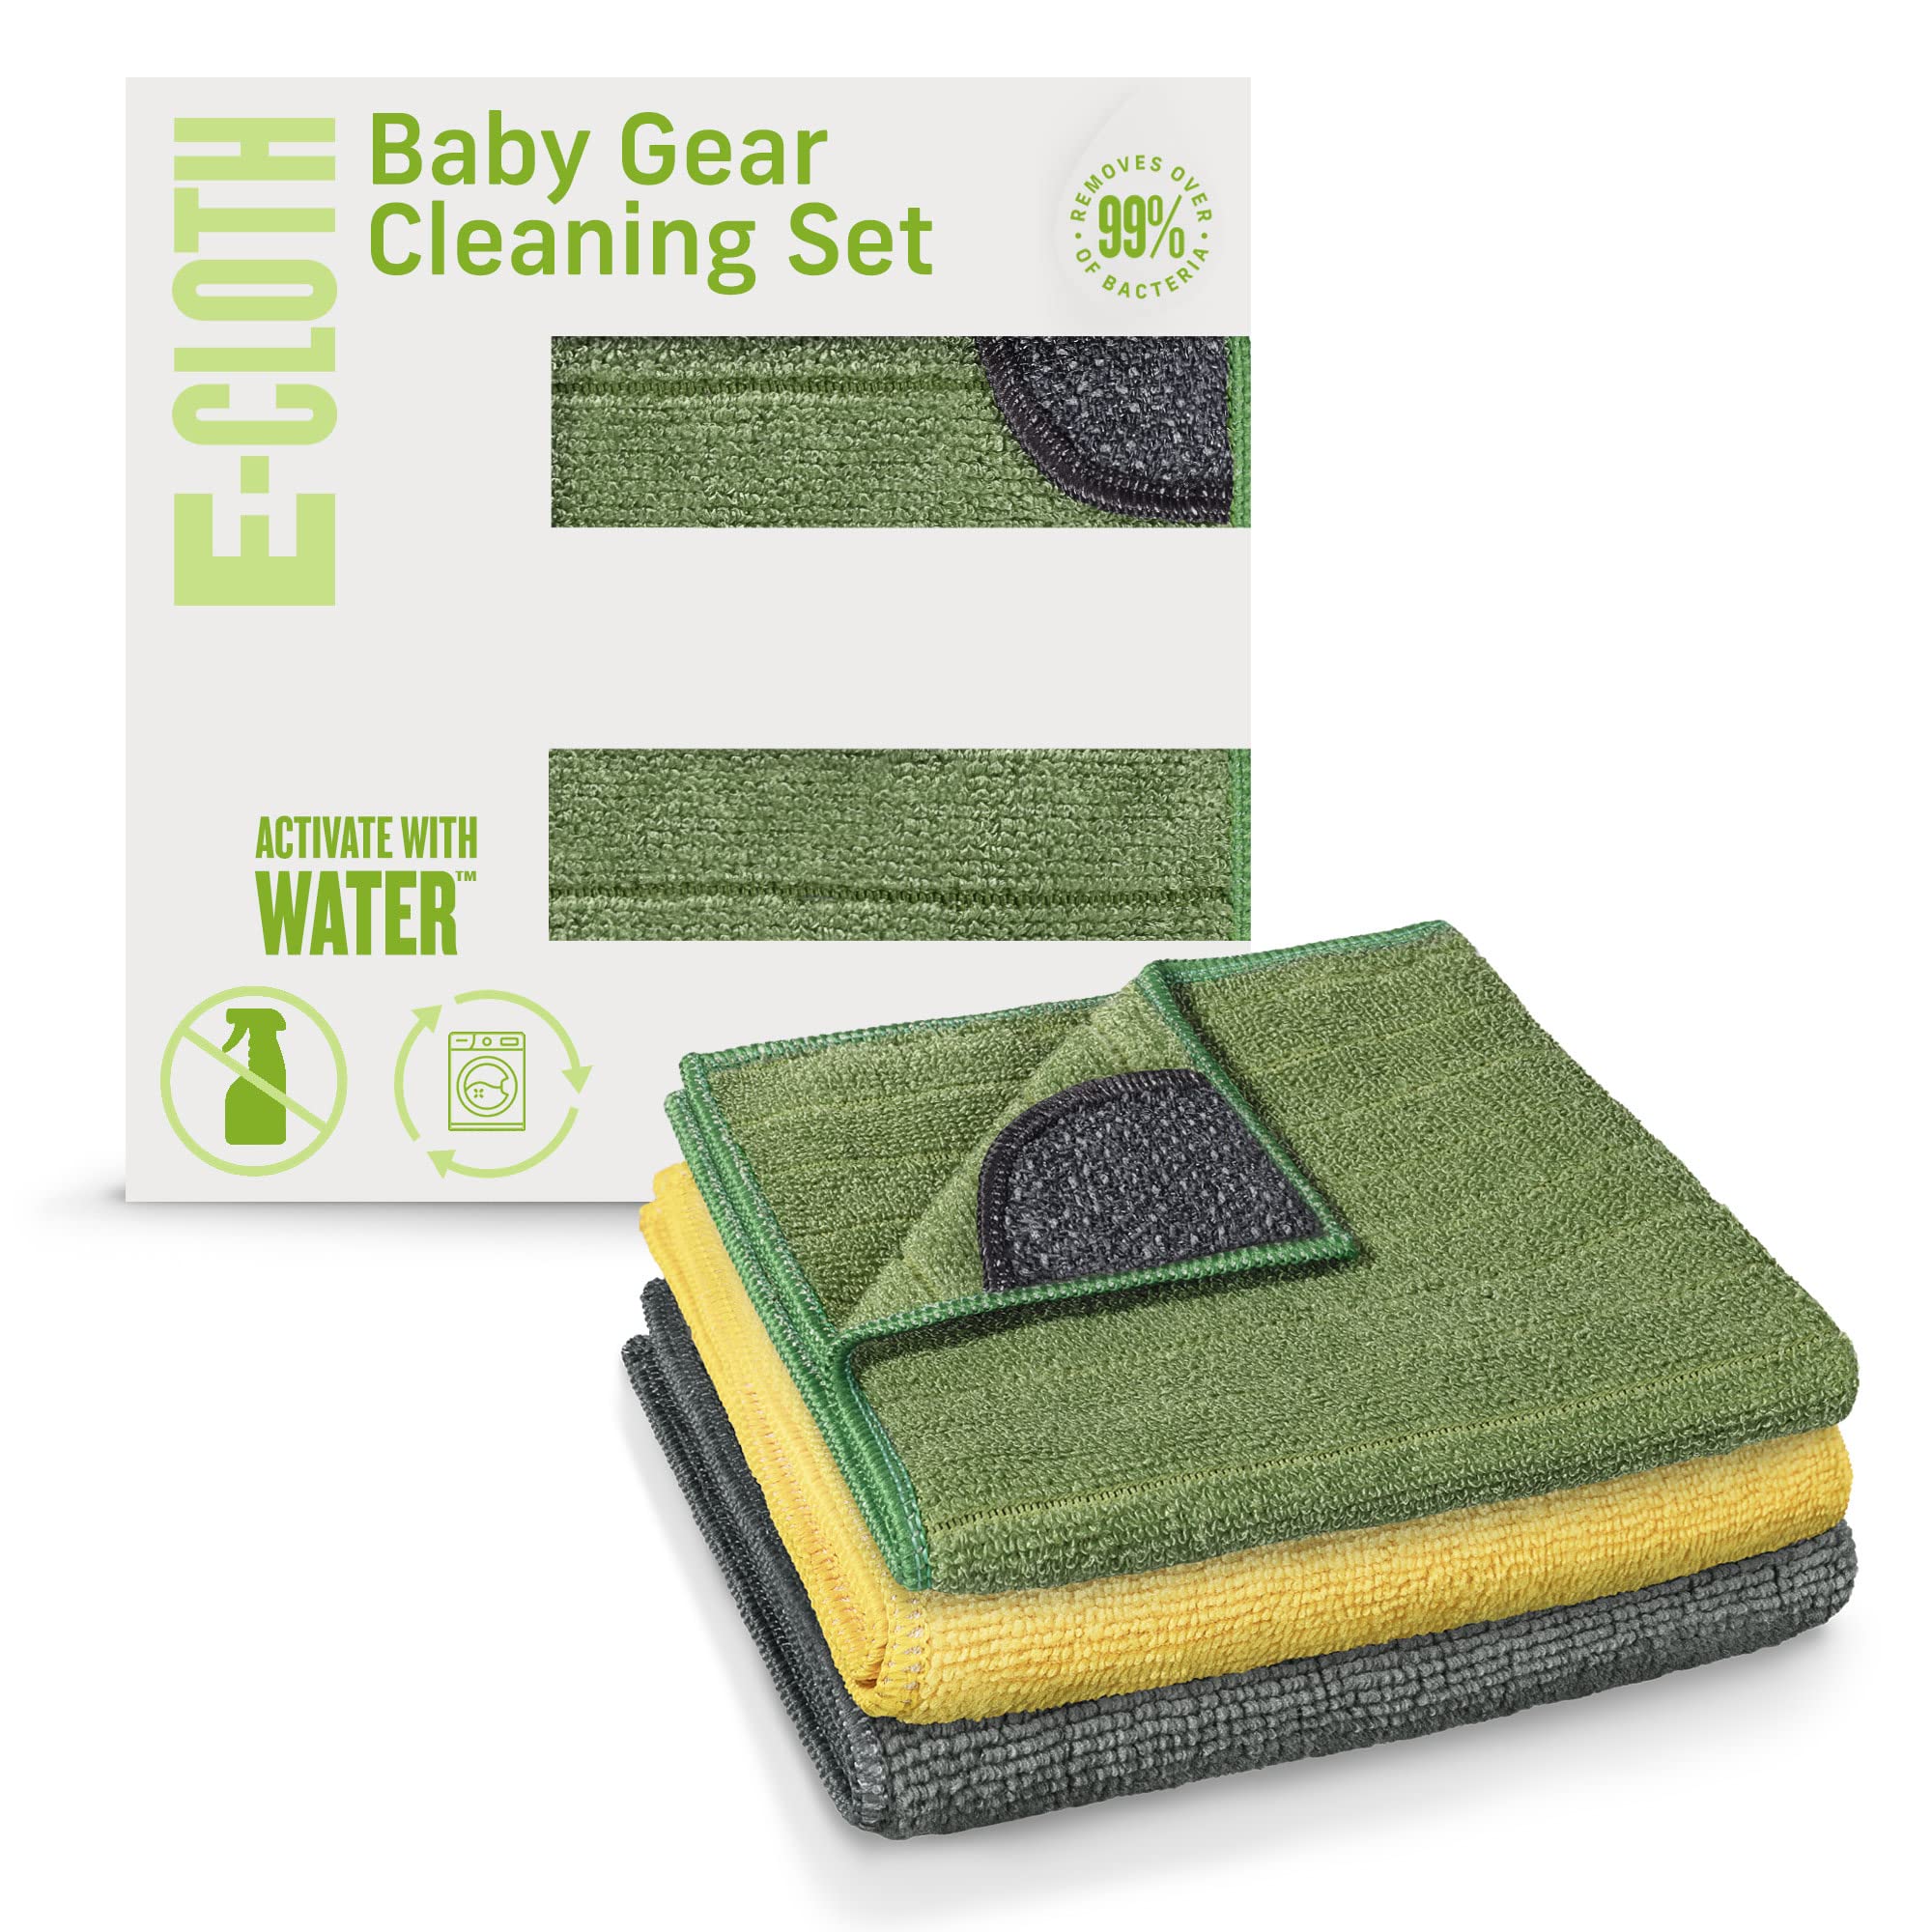 E-Cloth Baby Gear Cleaning Kit, Premium Microfiber Cloth, Ideal for Baby High Chairs, Cover, Car Seat, Booster Seat, Stroller, Nursery Toys, 100 Wash Promise